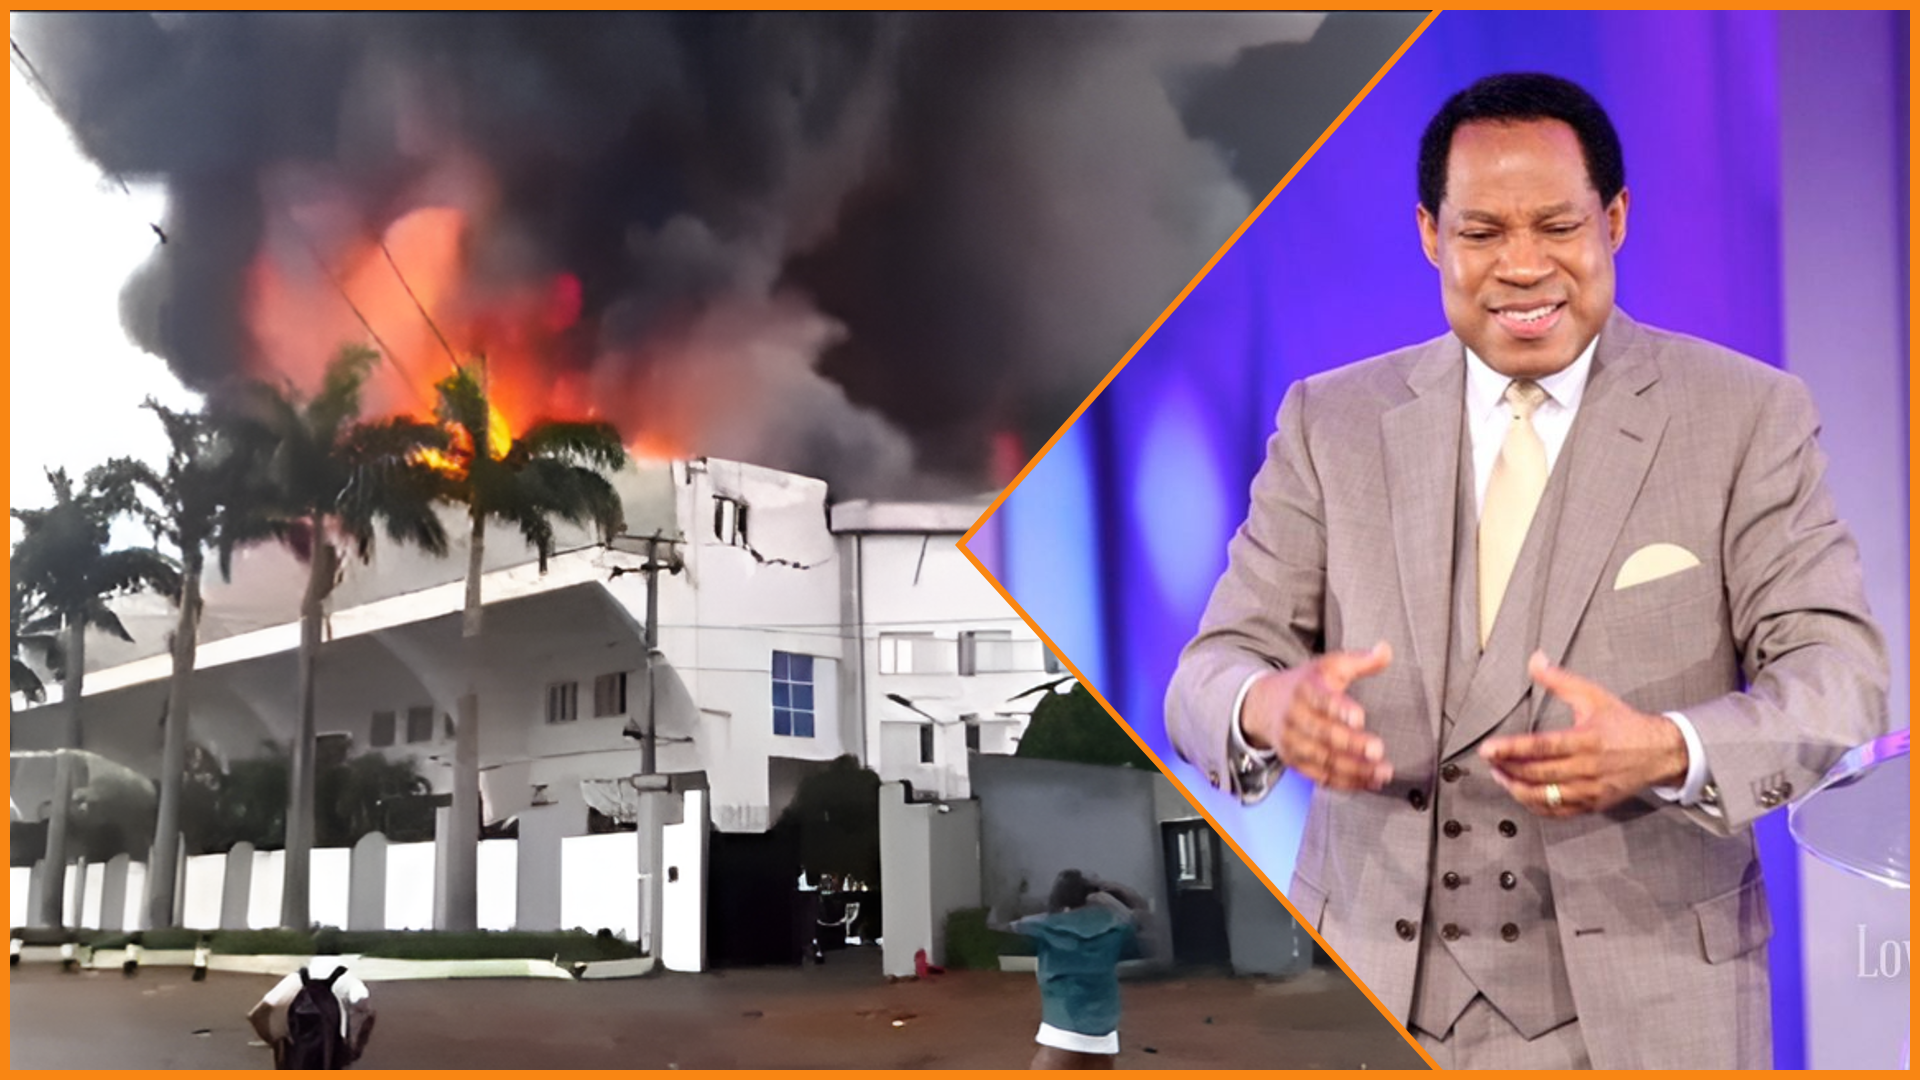 Pastor Chris Oyakhilome reacted that the fire incident at his church was a blessing in disguise